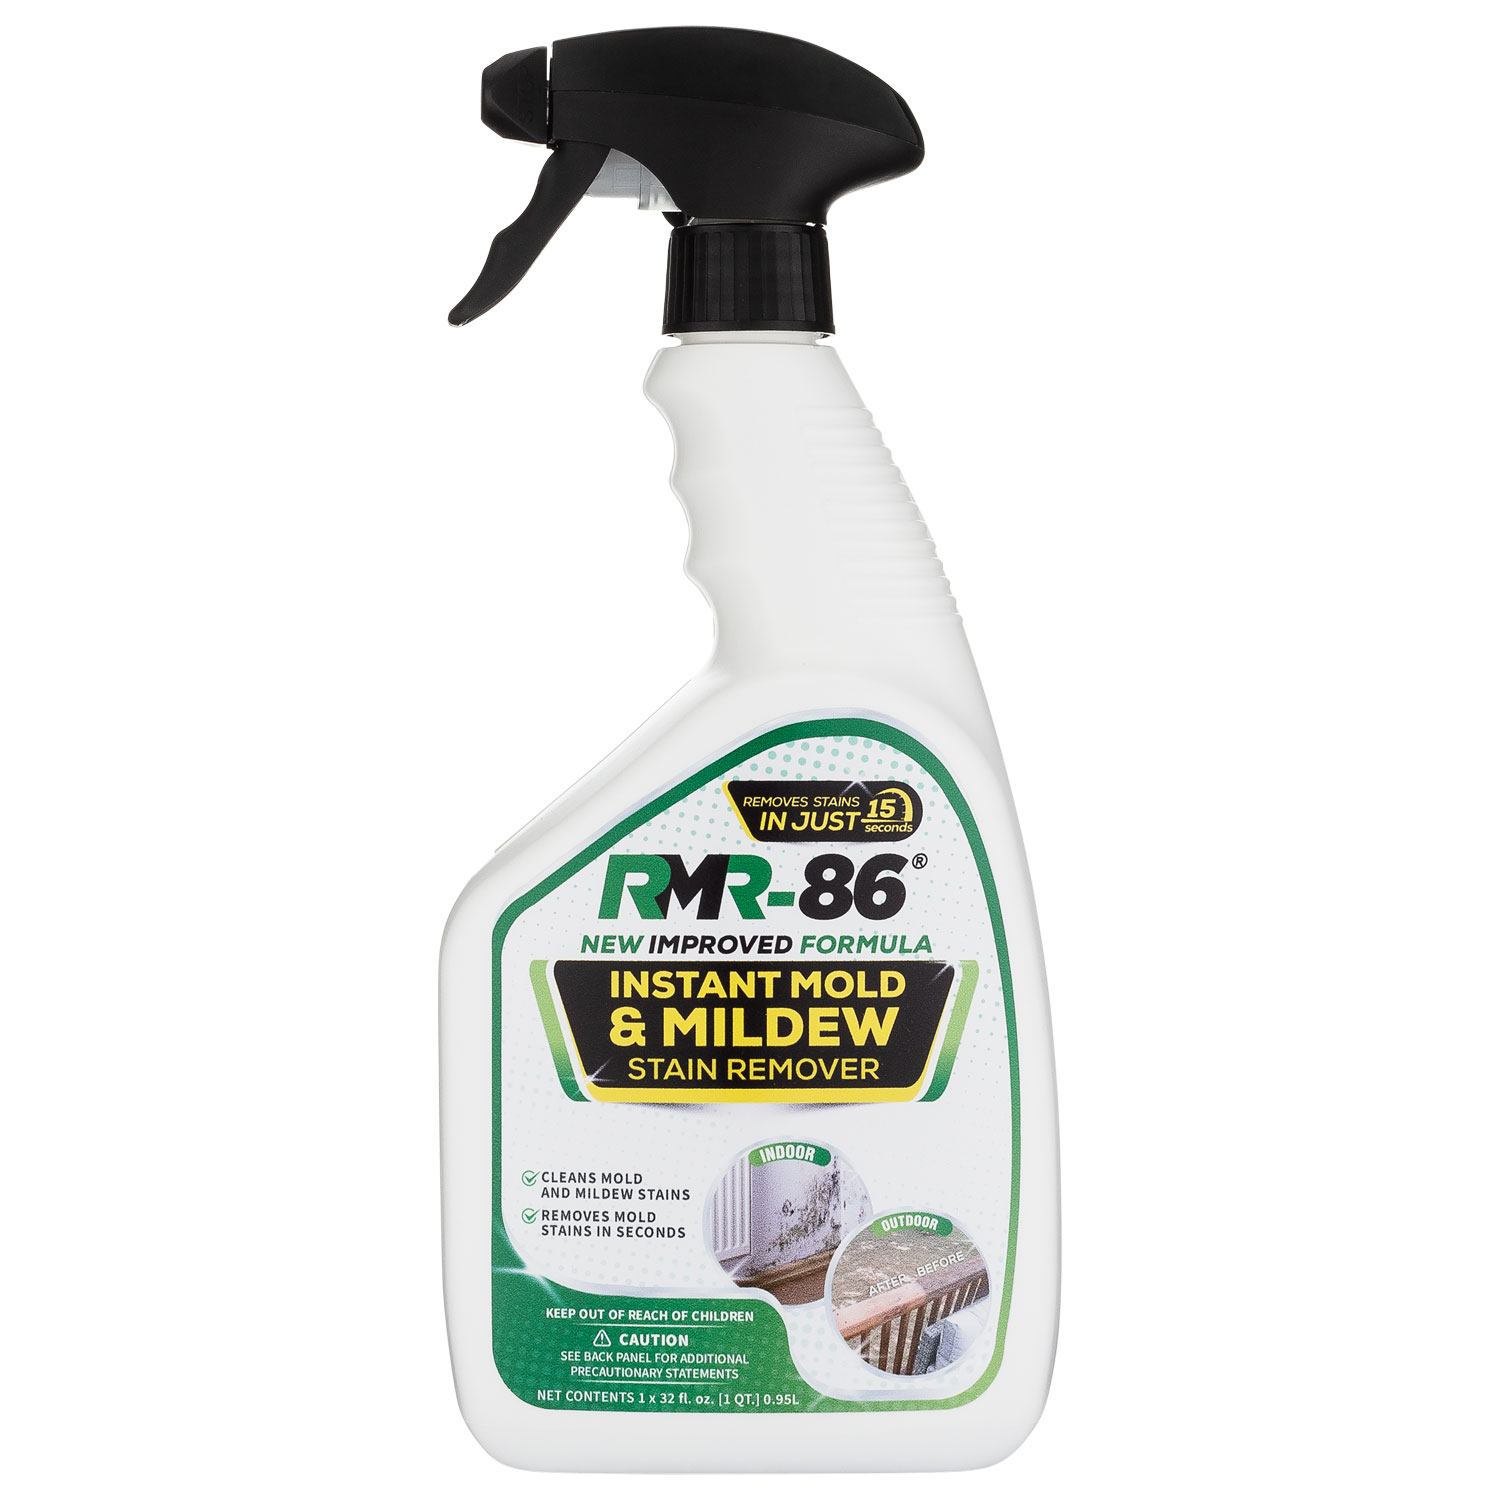 Mold Armor FG552 Mold Remover and Disinfectant, 32 Ounce, Liquid,  Benzaldehyde Organic, Clear: Mold & Mildew Remover (075919005521-1)